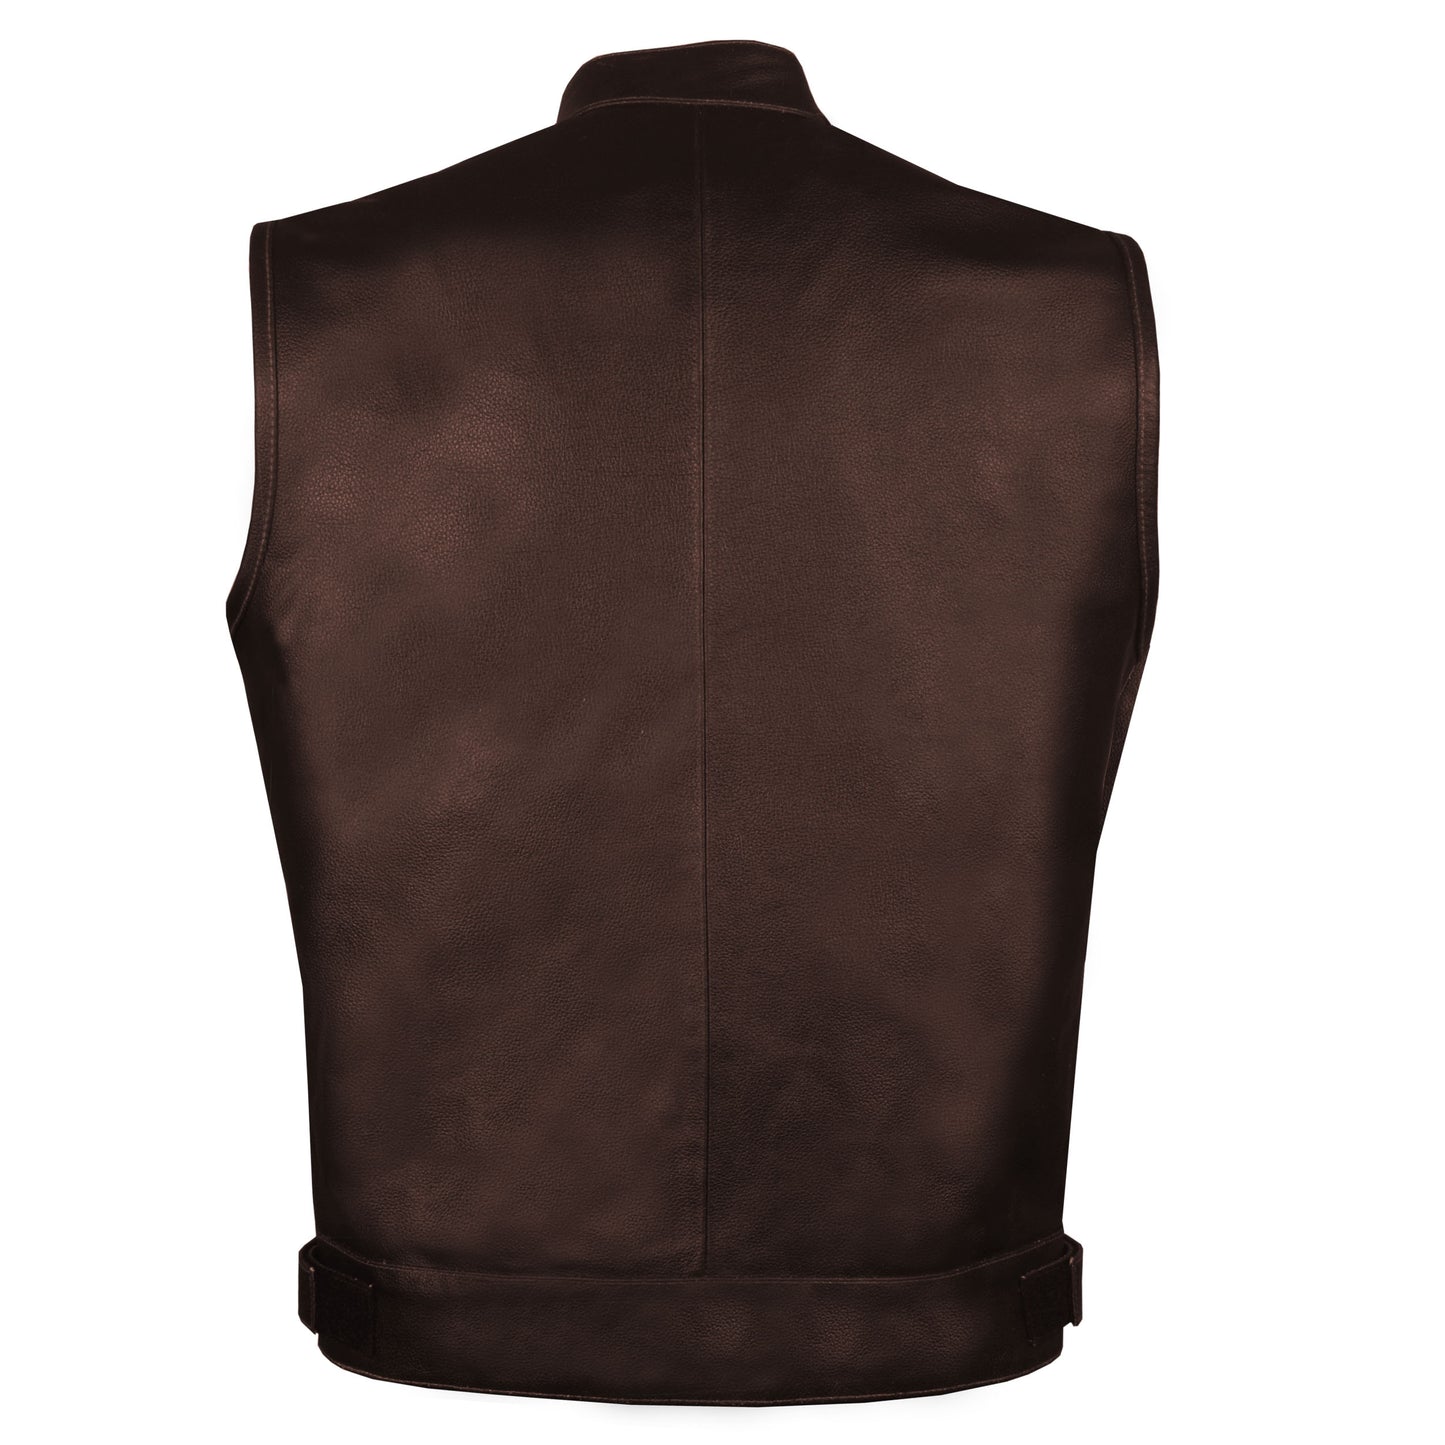 Men's ARMOR Leather SOA Anarchy Motorcycle Biker Club Concealed Carry Vest Coffee Brown